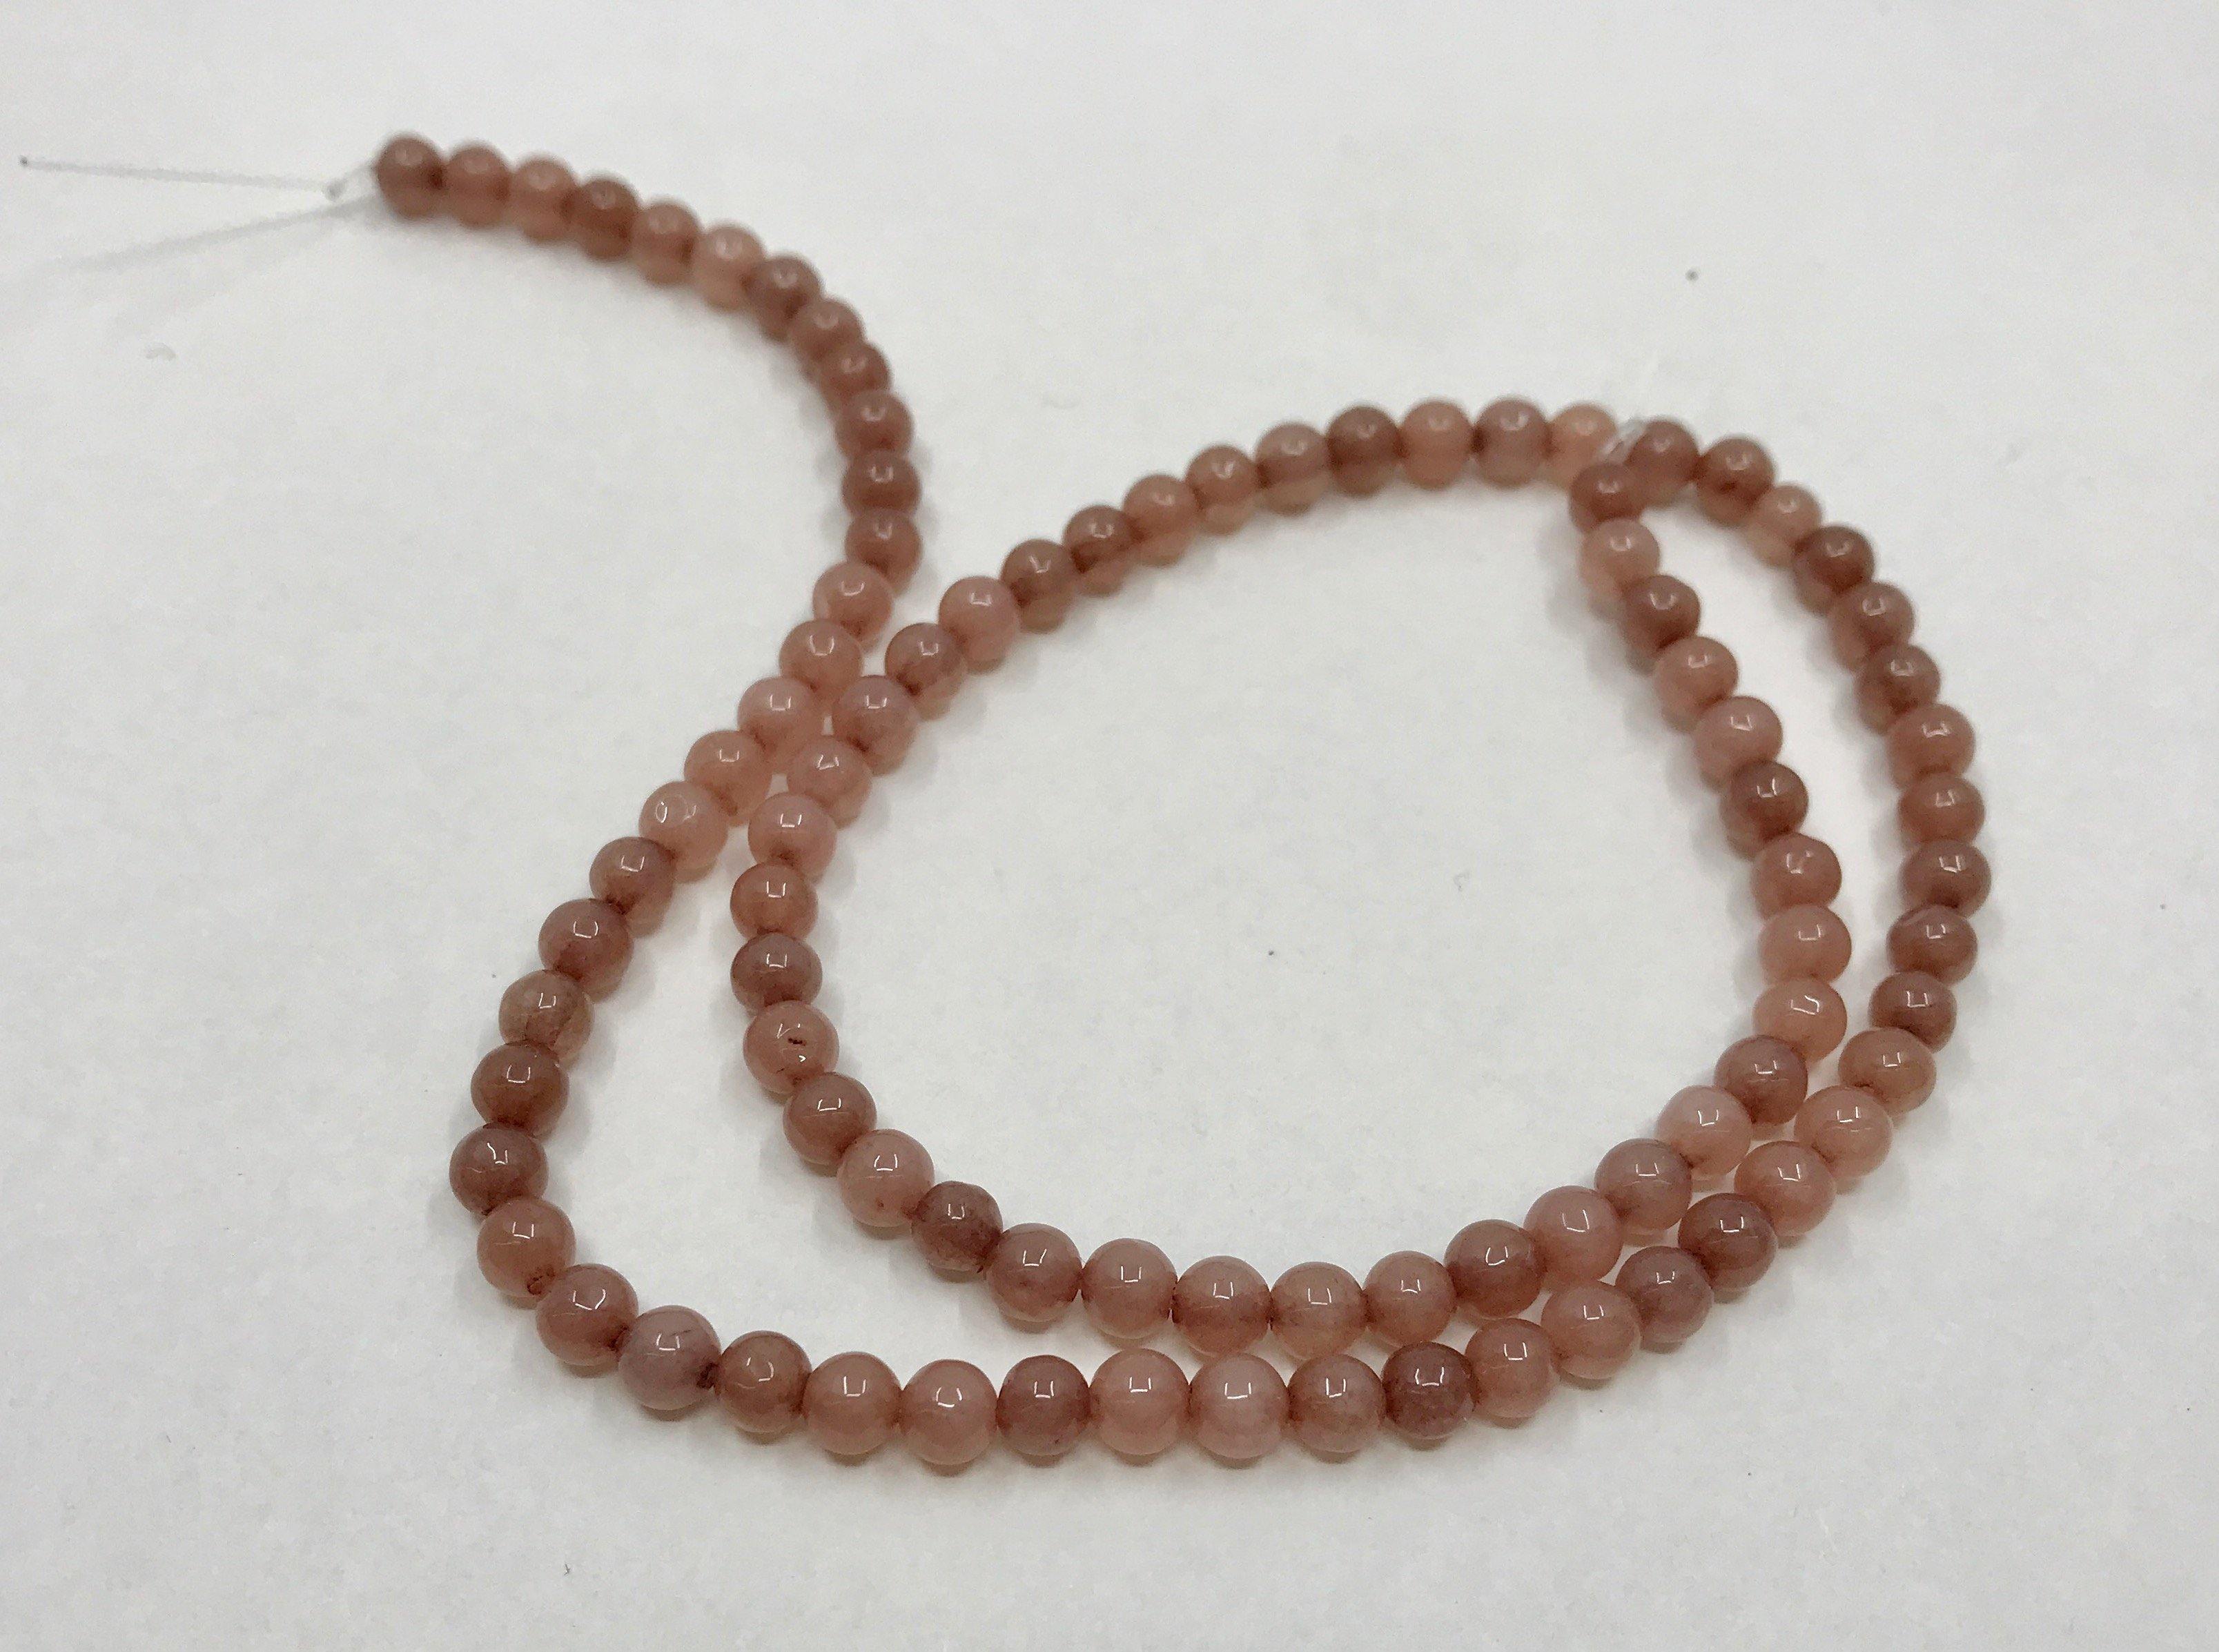 Naturstein Perlen 4 mm - Farbe rose taupe - bead&more